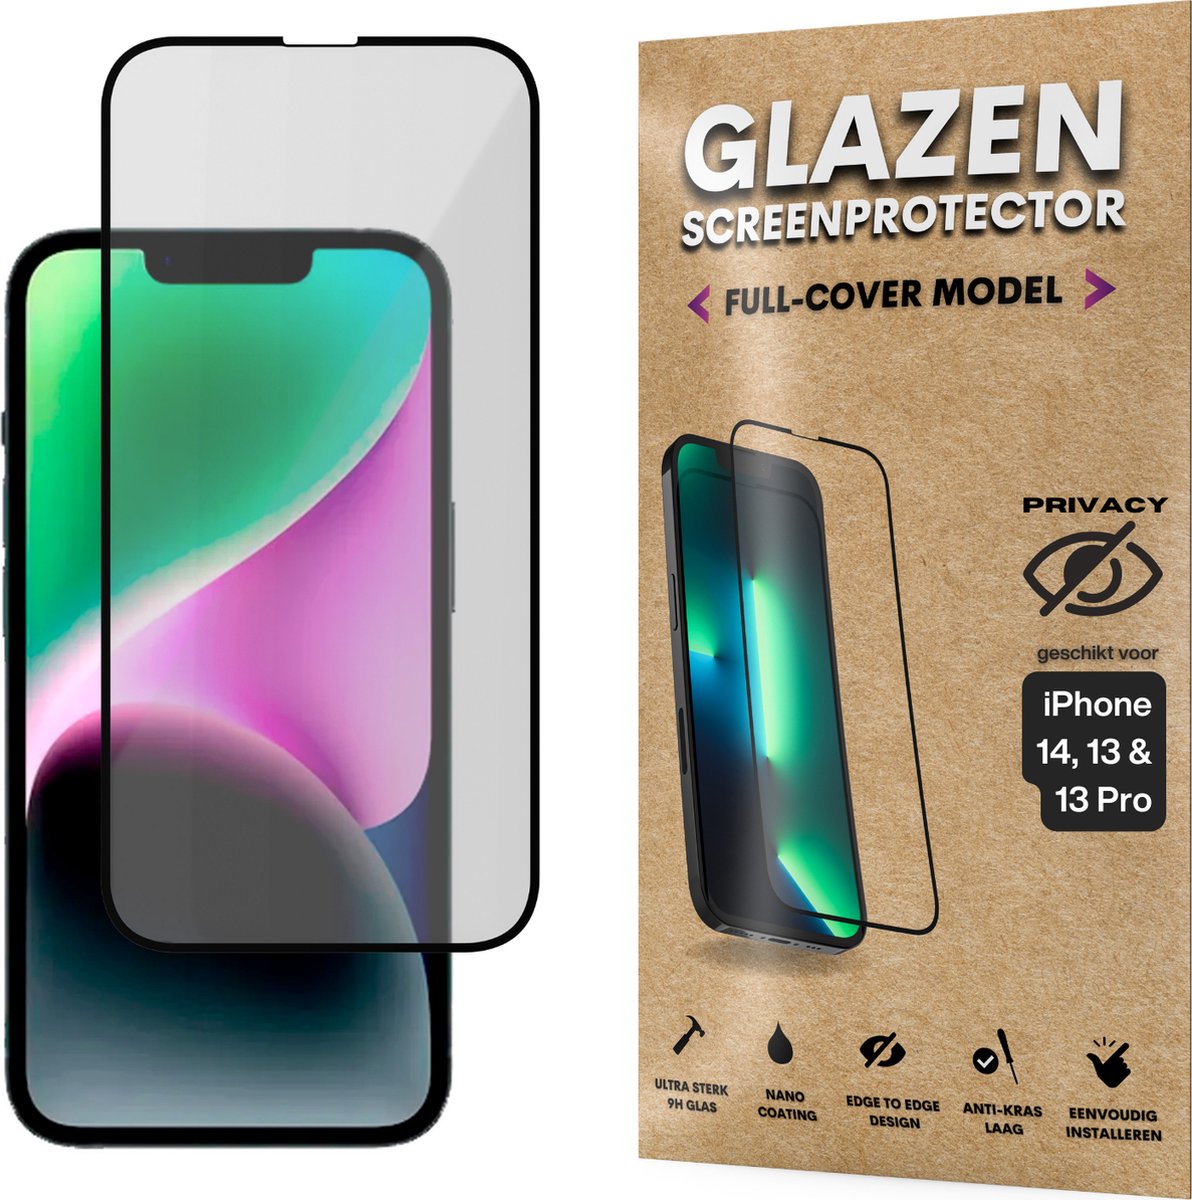 Privacy Screenprotector - Geschikt voor iPhone 14 / 13 / 13 Pro - Gehard Glas - Full Cover Tempered Privacy Glass - Case Friendly